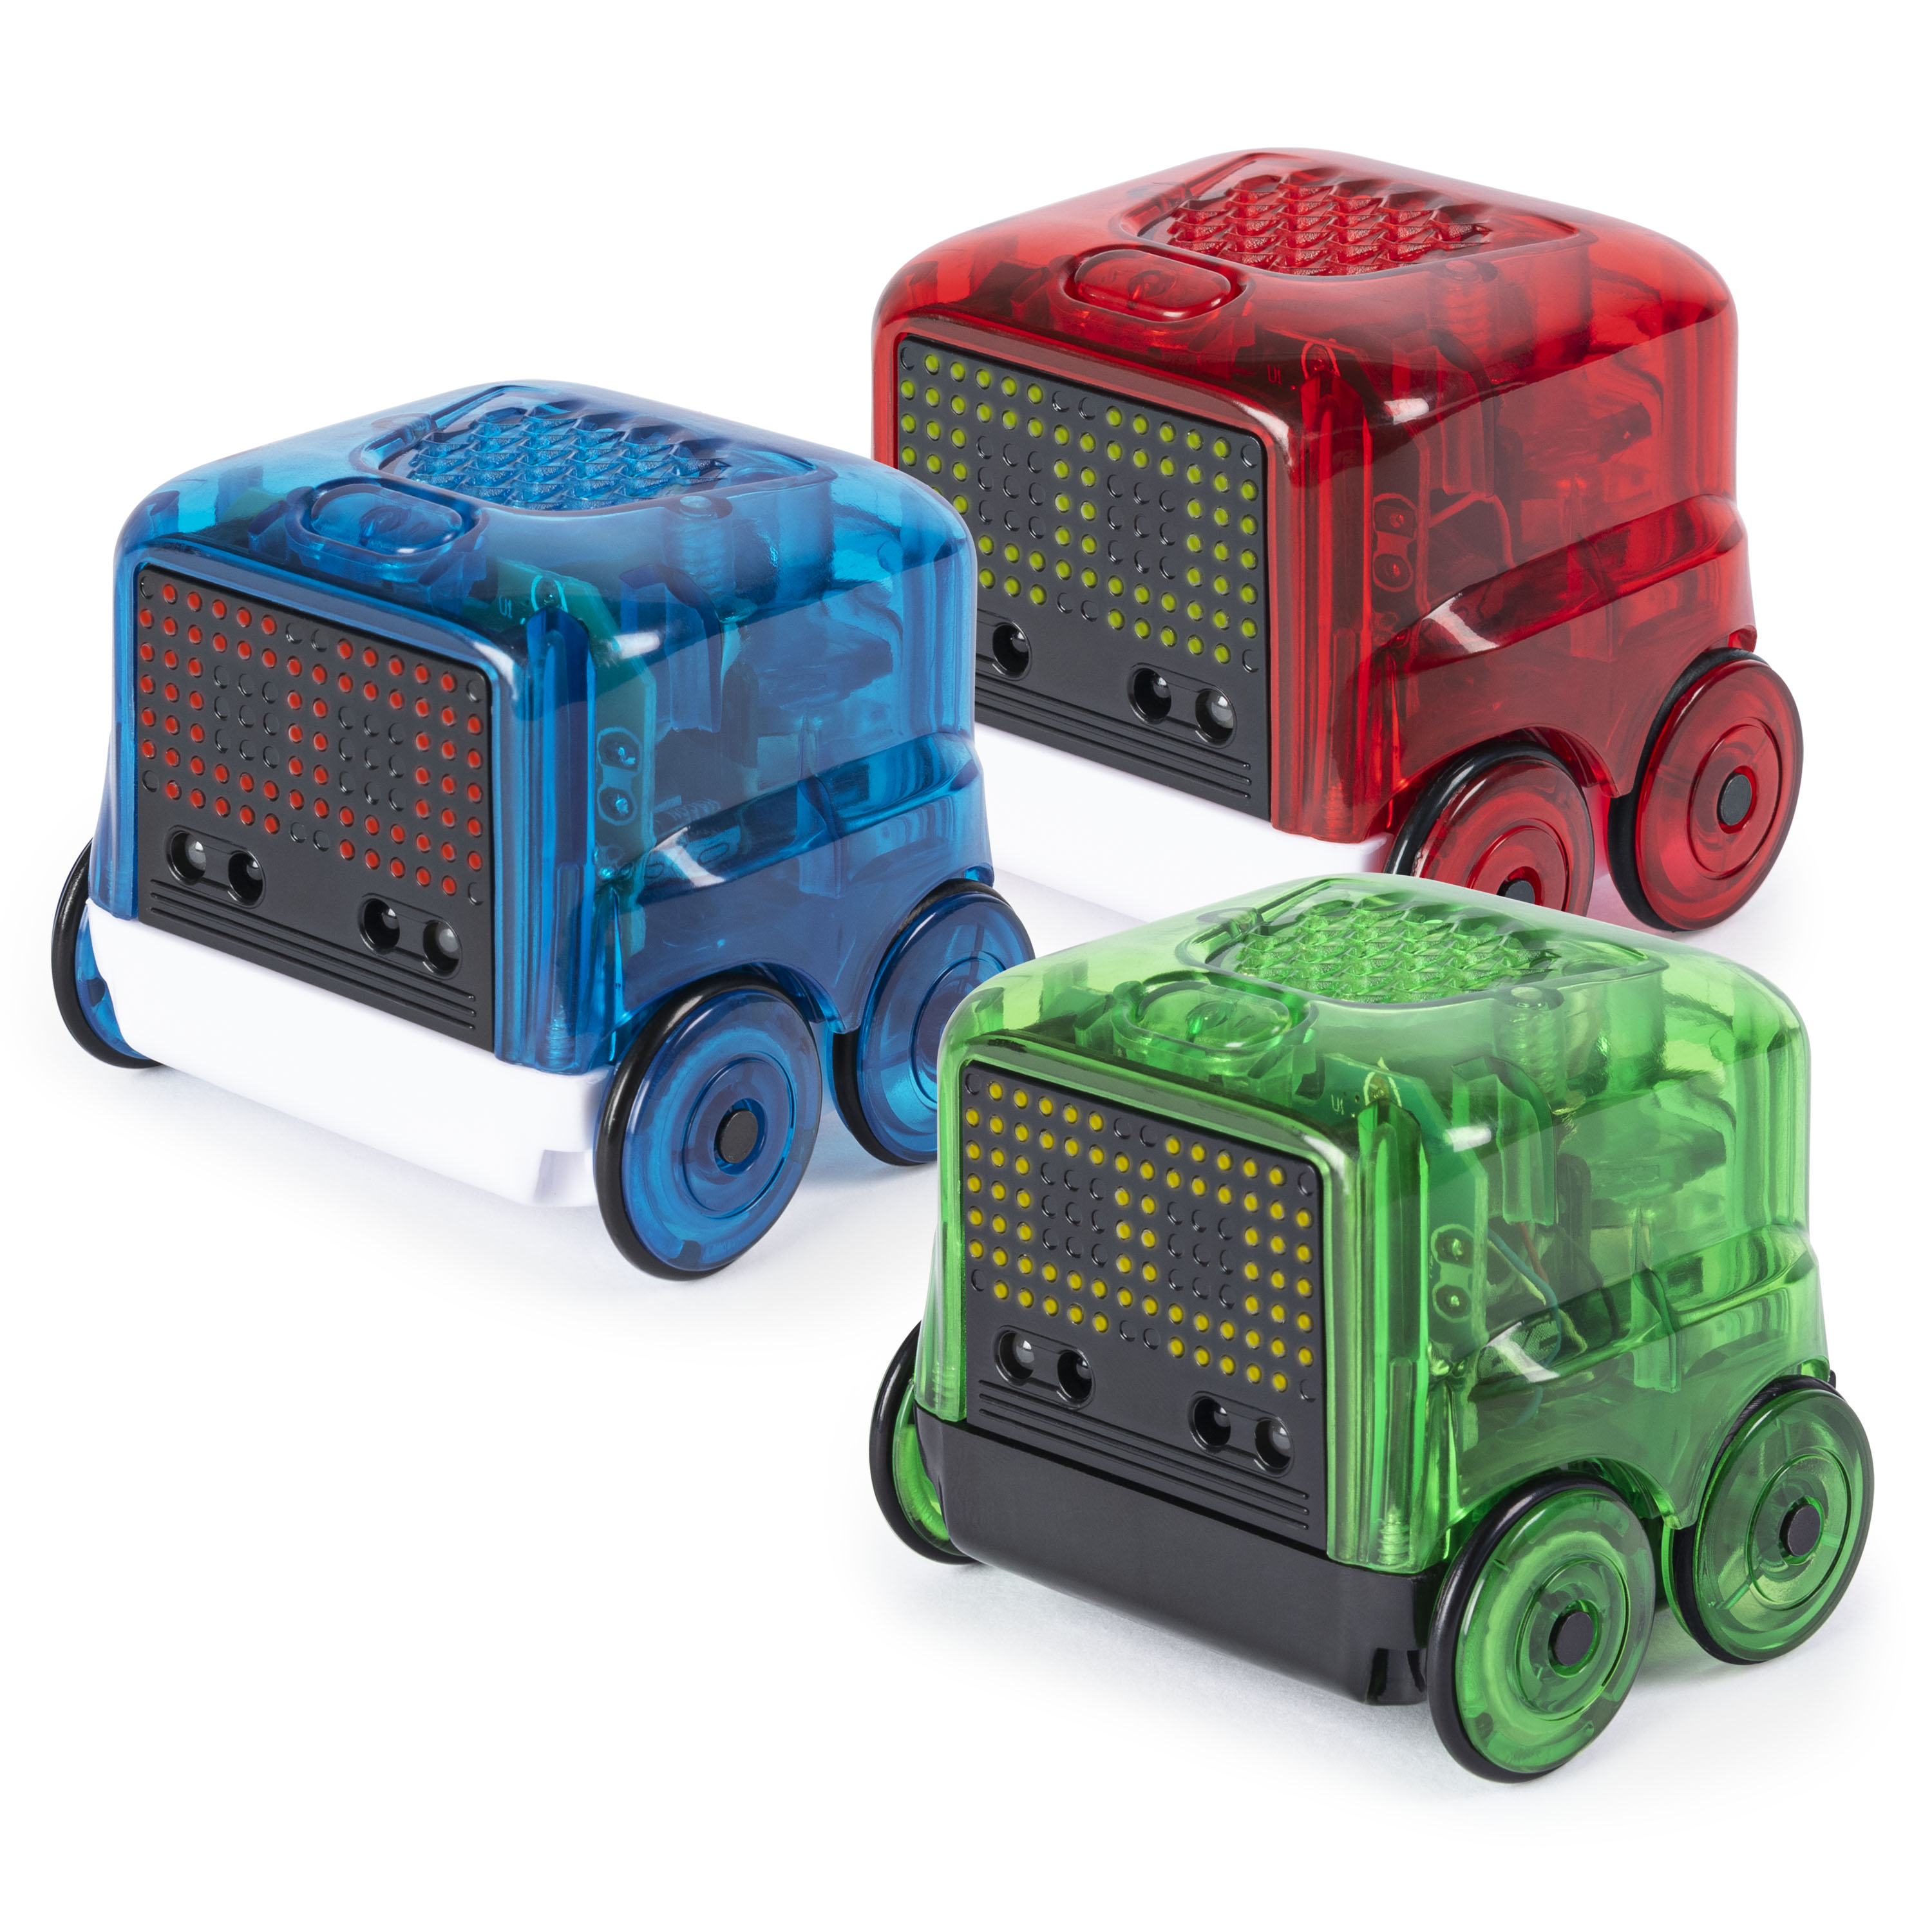 Novie, Interactive Smart Robot with Over 75 Actions and Learns 12 Tricks for Kids Aged 4 and Up - Pickup Today! Colors may vary, 1 item - image 1 of 7